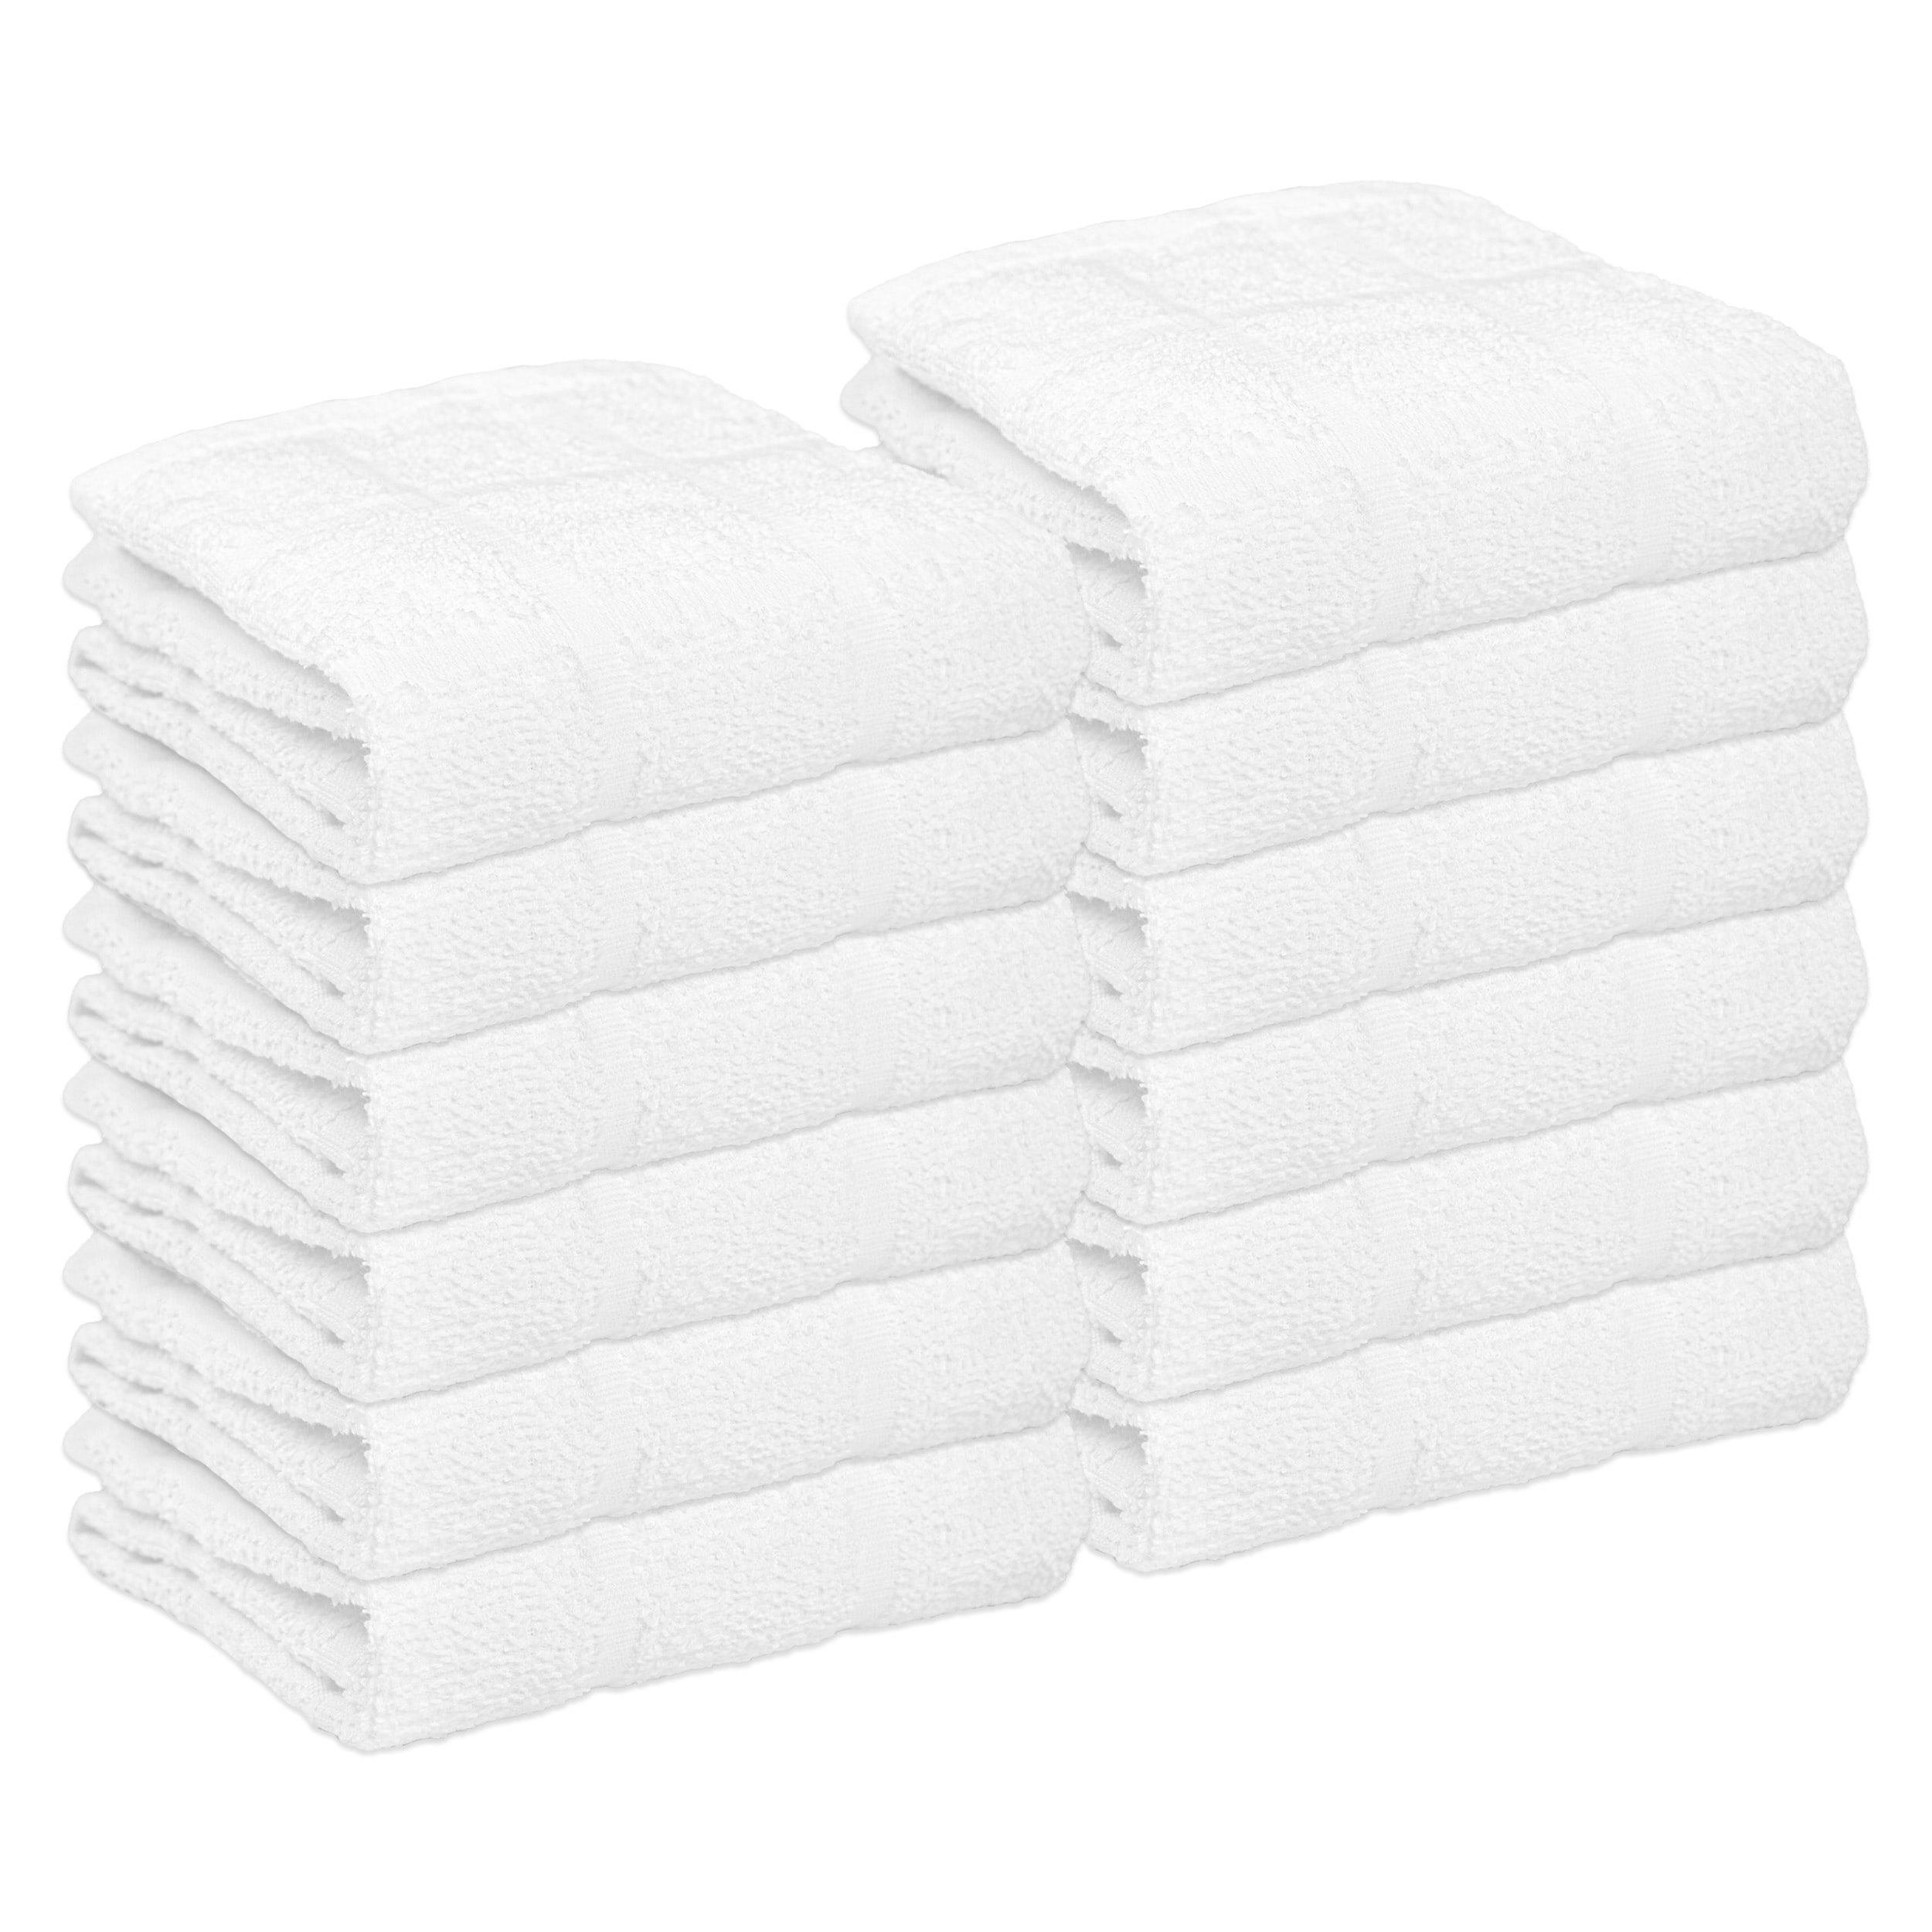 https://ak1.ostkcdn.com/images/products/is/images/direct/802fd6f7e5154d684dc37f7fd08e1a3364f4ed61/Cooks-Linen-Kitchen-Towels---12-Pack.jpg